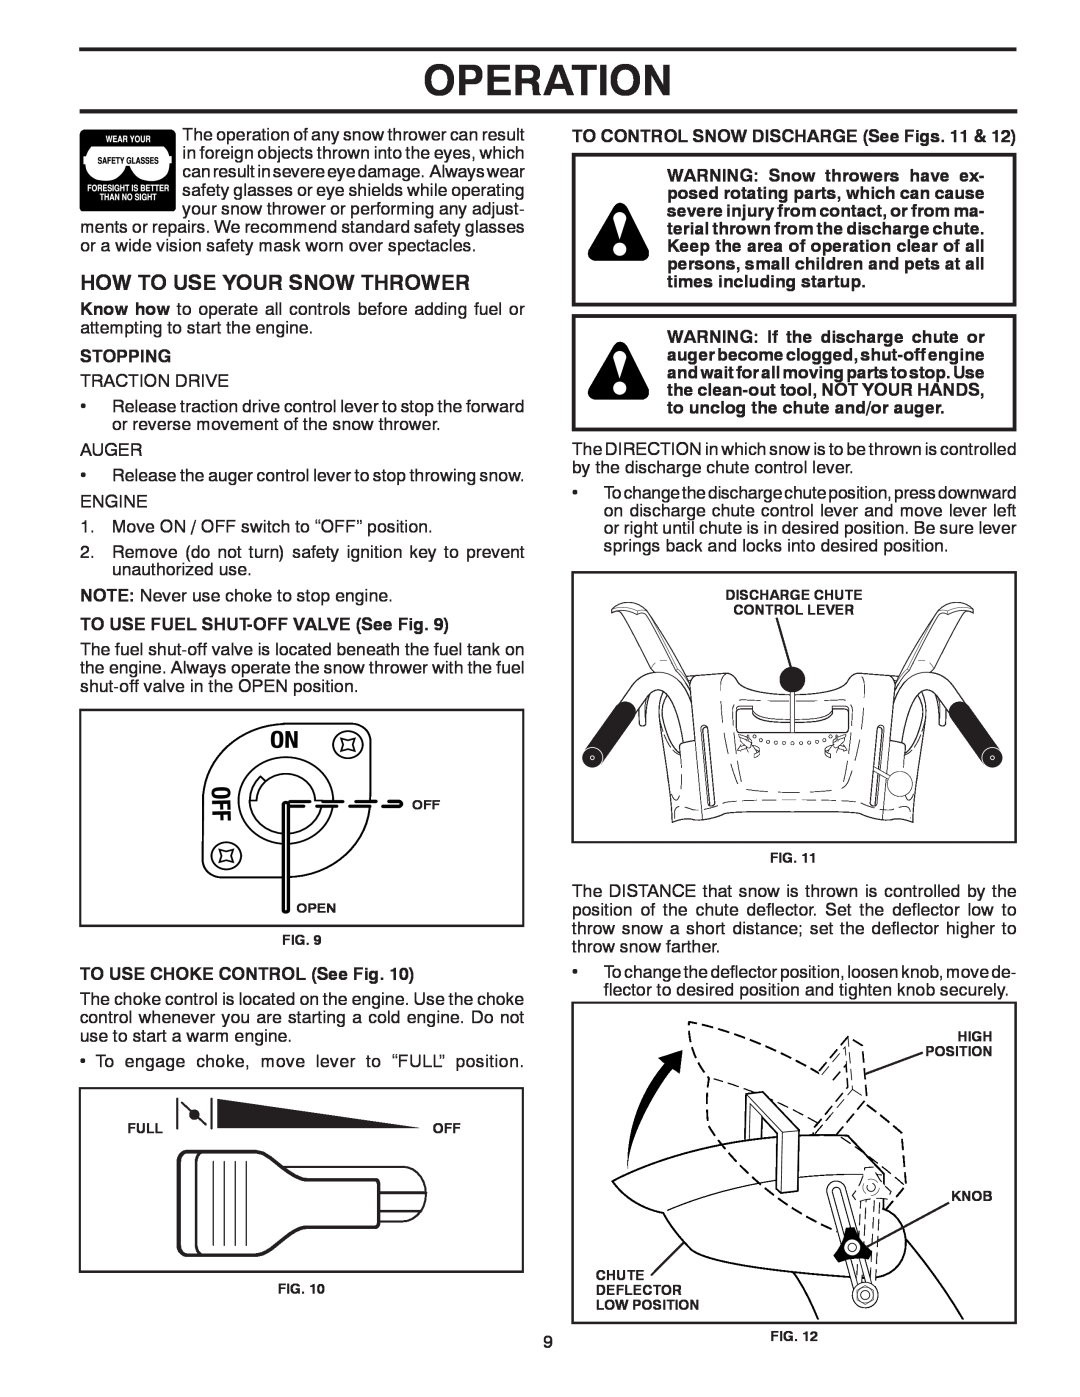 McCulloch MC12527ES owner manual How To Use Your Snow Thrower, Operation, Stopping, TO USE FUEL SHUT-OFFVALVE See Fig 